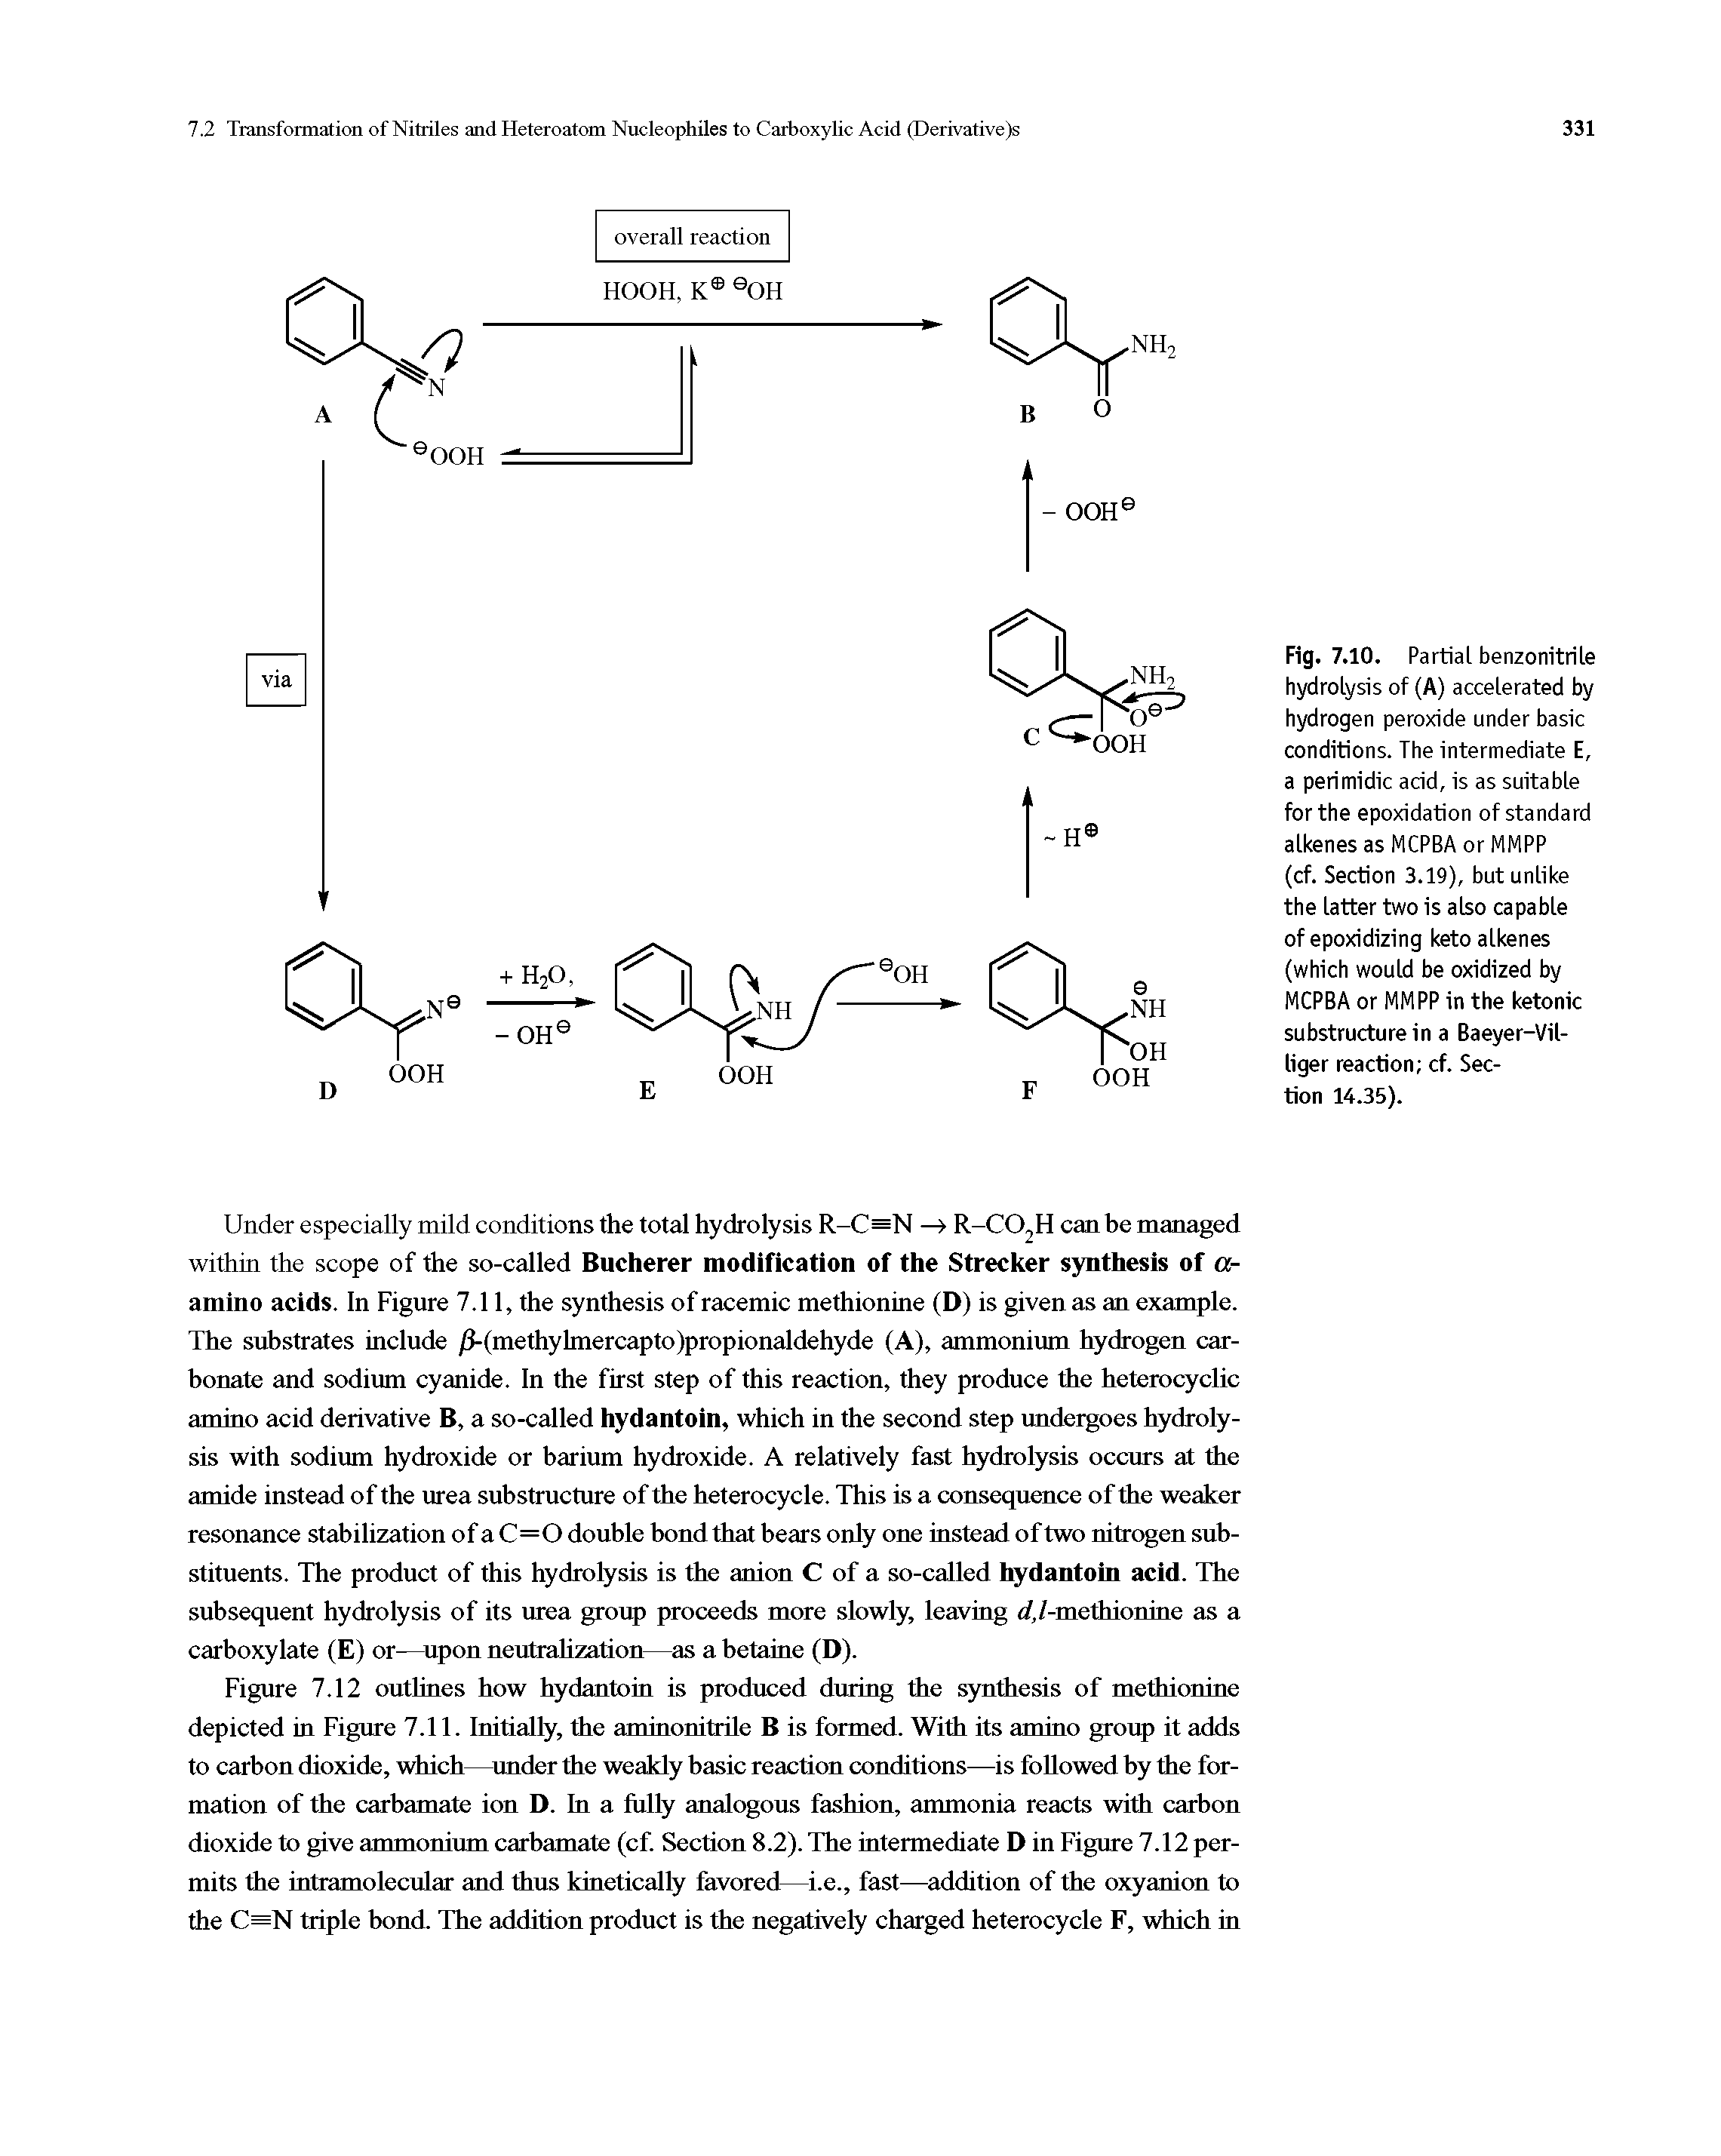 Fig. 7.10. Partial benzonitrile hydrolysis of (A) accelerated by hydrogen peroxide under basic conditions. The intermediate E, a perimidic acid, is as suitable for the epoxidation of standard alkenes as MCPBA or HHPP (cf. Section 3.19), but unlike the latter two is also capable of epoxidizing keto alkenes (which would be oxidized by MCPBA or MMPP in the ketonic substructure in a Baeyer-Vil-liger reaction cf. Section 14.35).